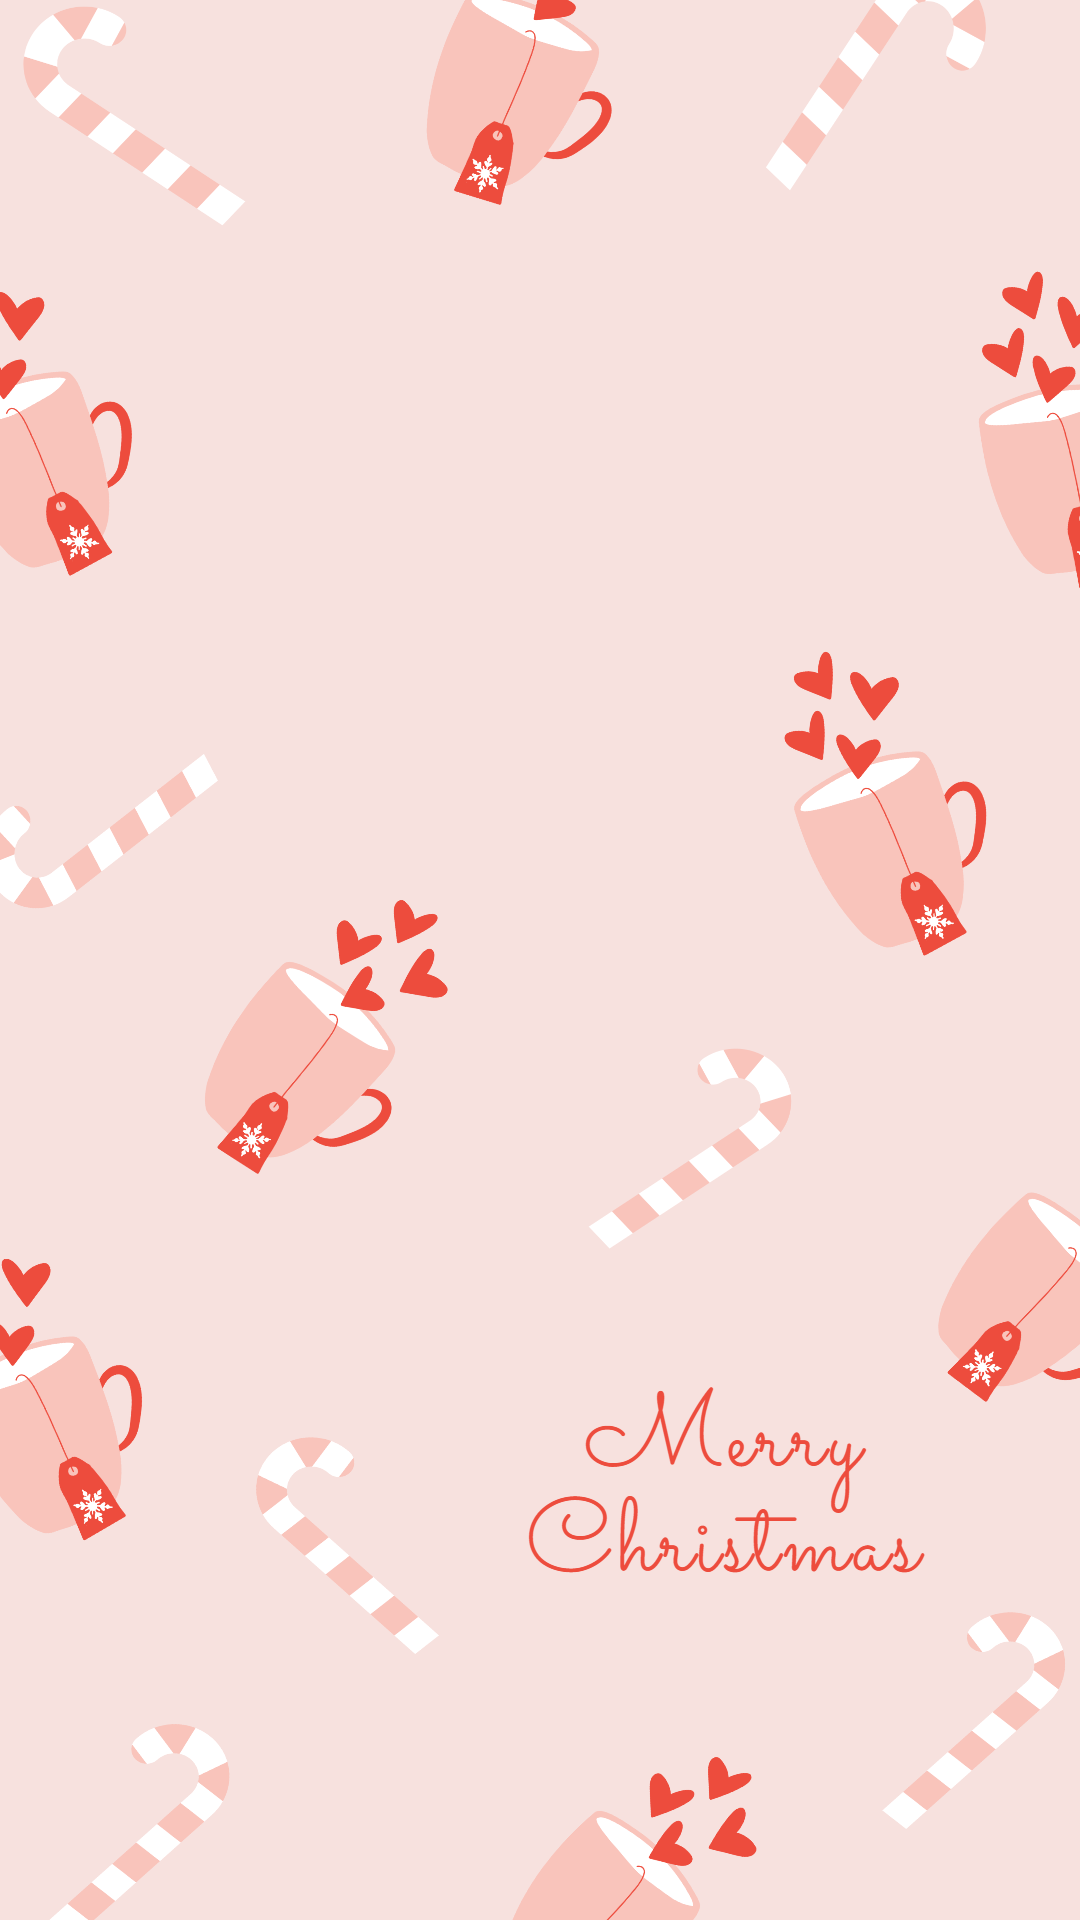 A Christmas wallpaper with pink mugs and candy canes. - Christmas iPhone, Christmas, cute Christmas